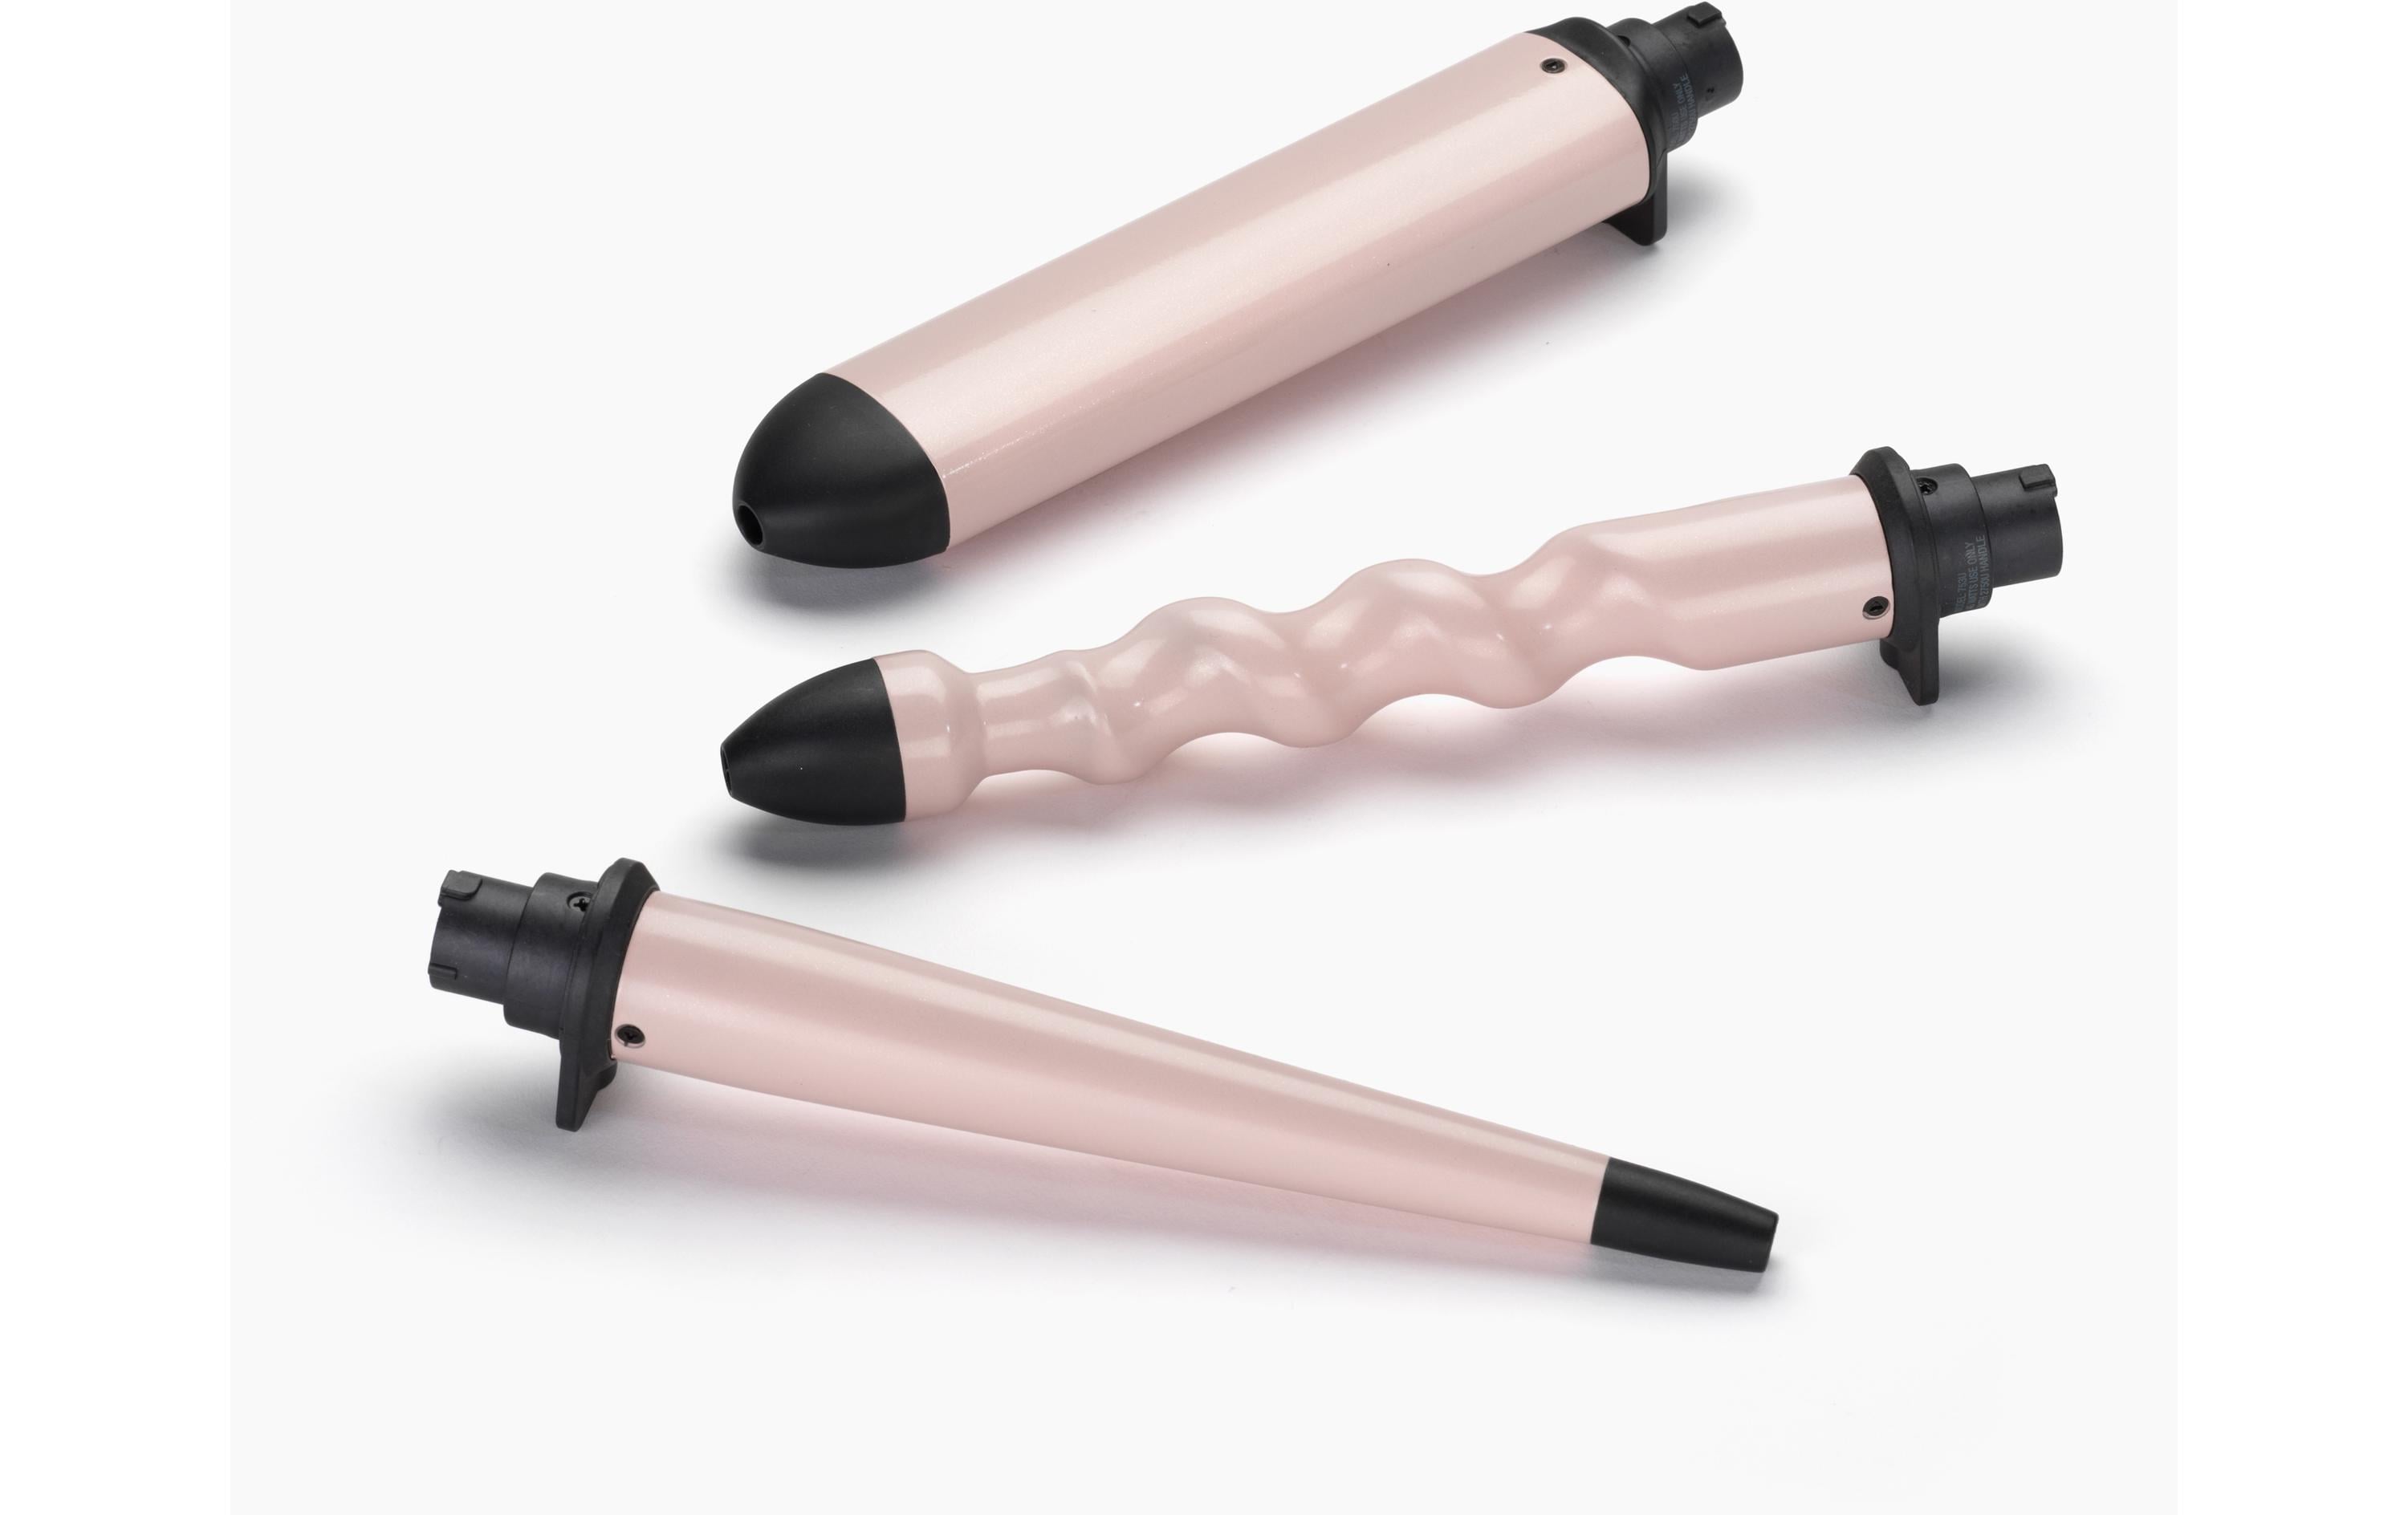 Babyliss Multistyler Curl and Wave Trio MS750E